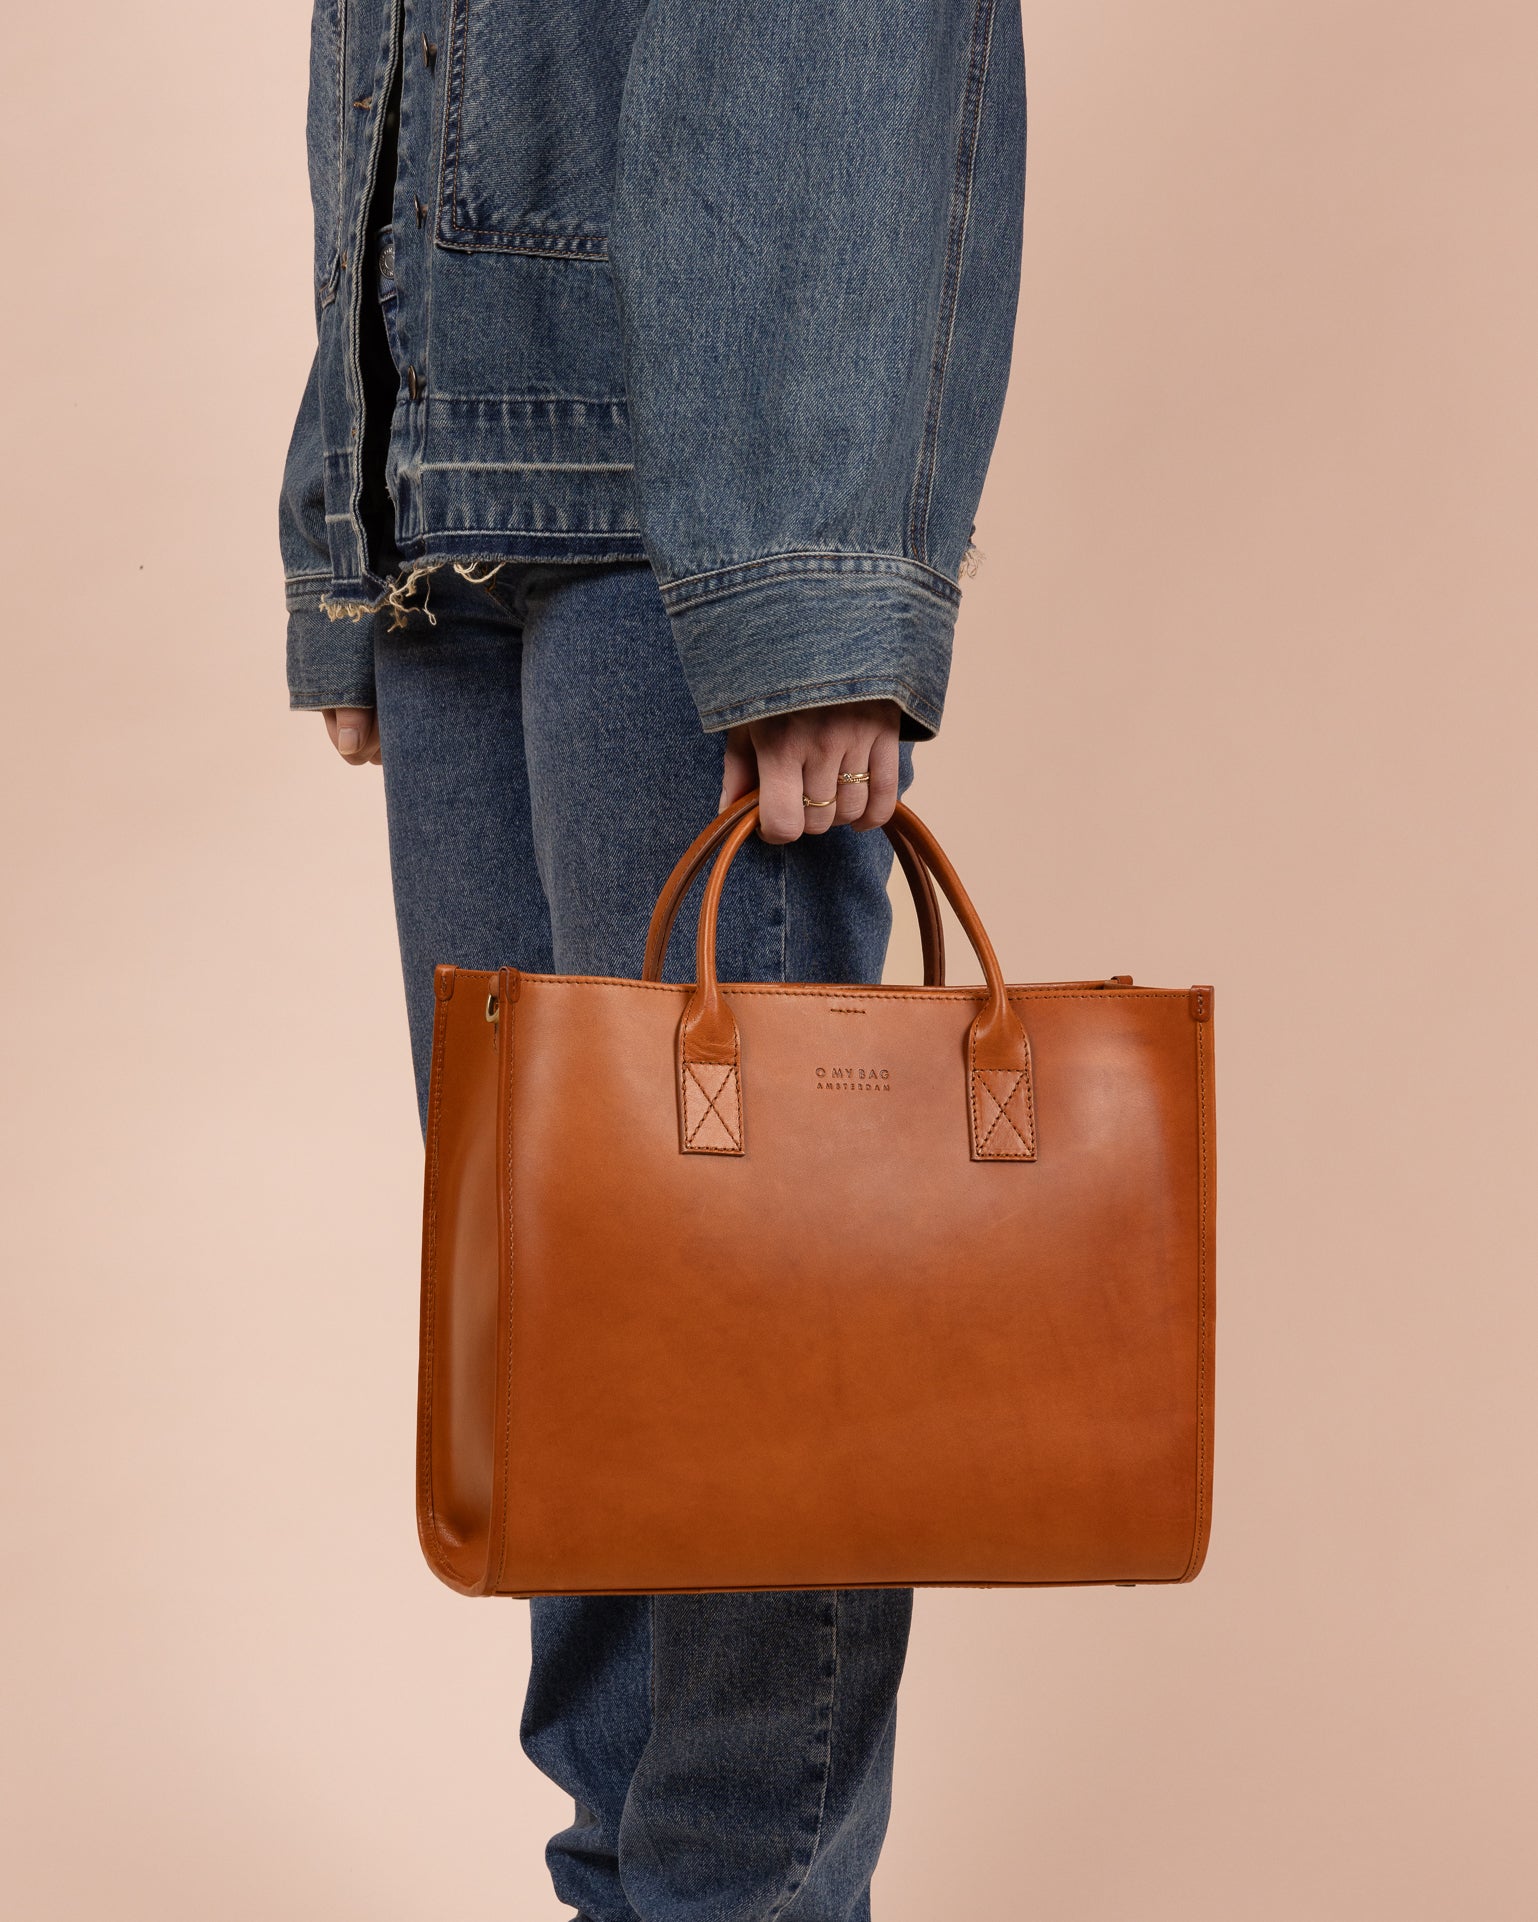 Rectangle shaped leather tote bag - model image